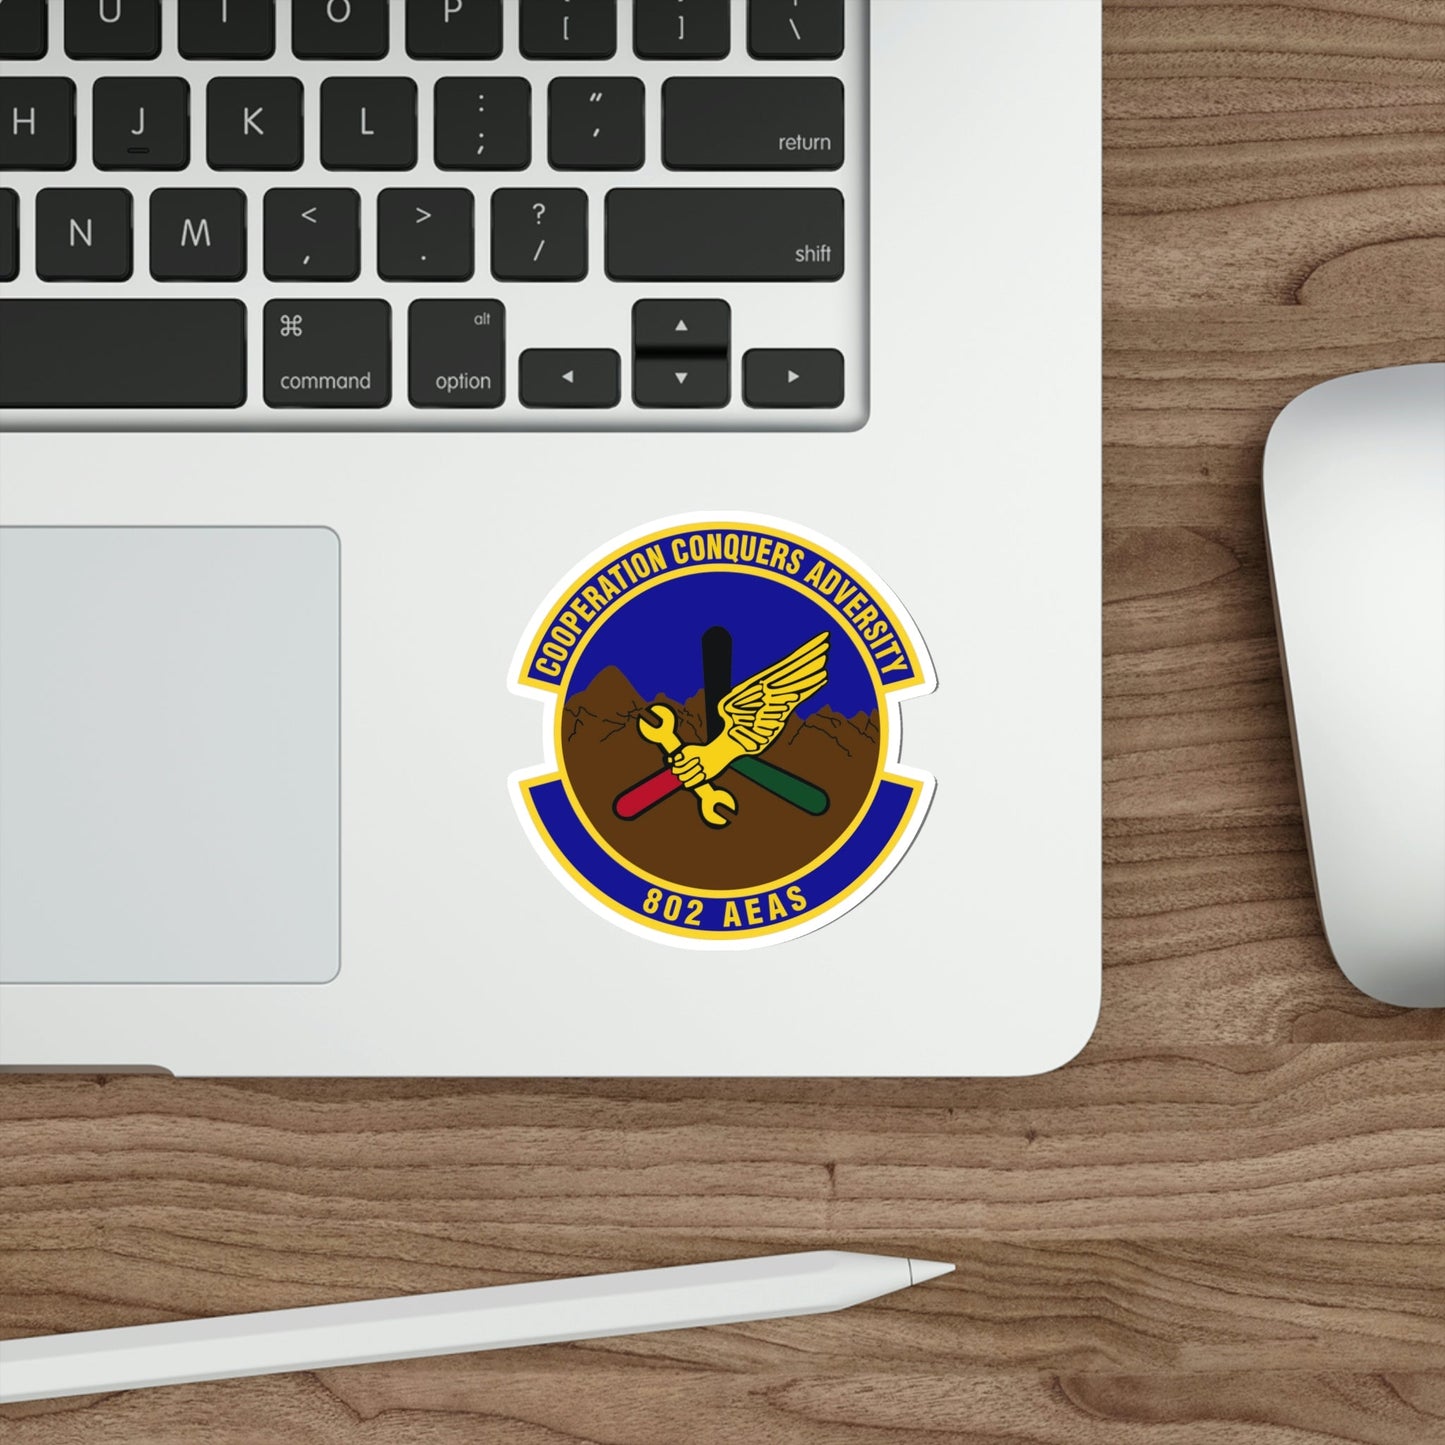 802d Air Expeditionary Advisory Squadron (U.S. Air Force) STICKER Vinyl Die-Cut Decal-The Sticker Space